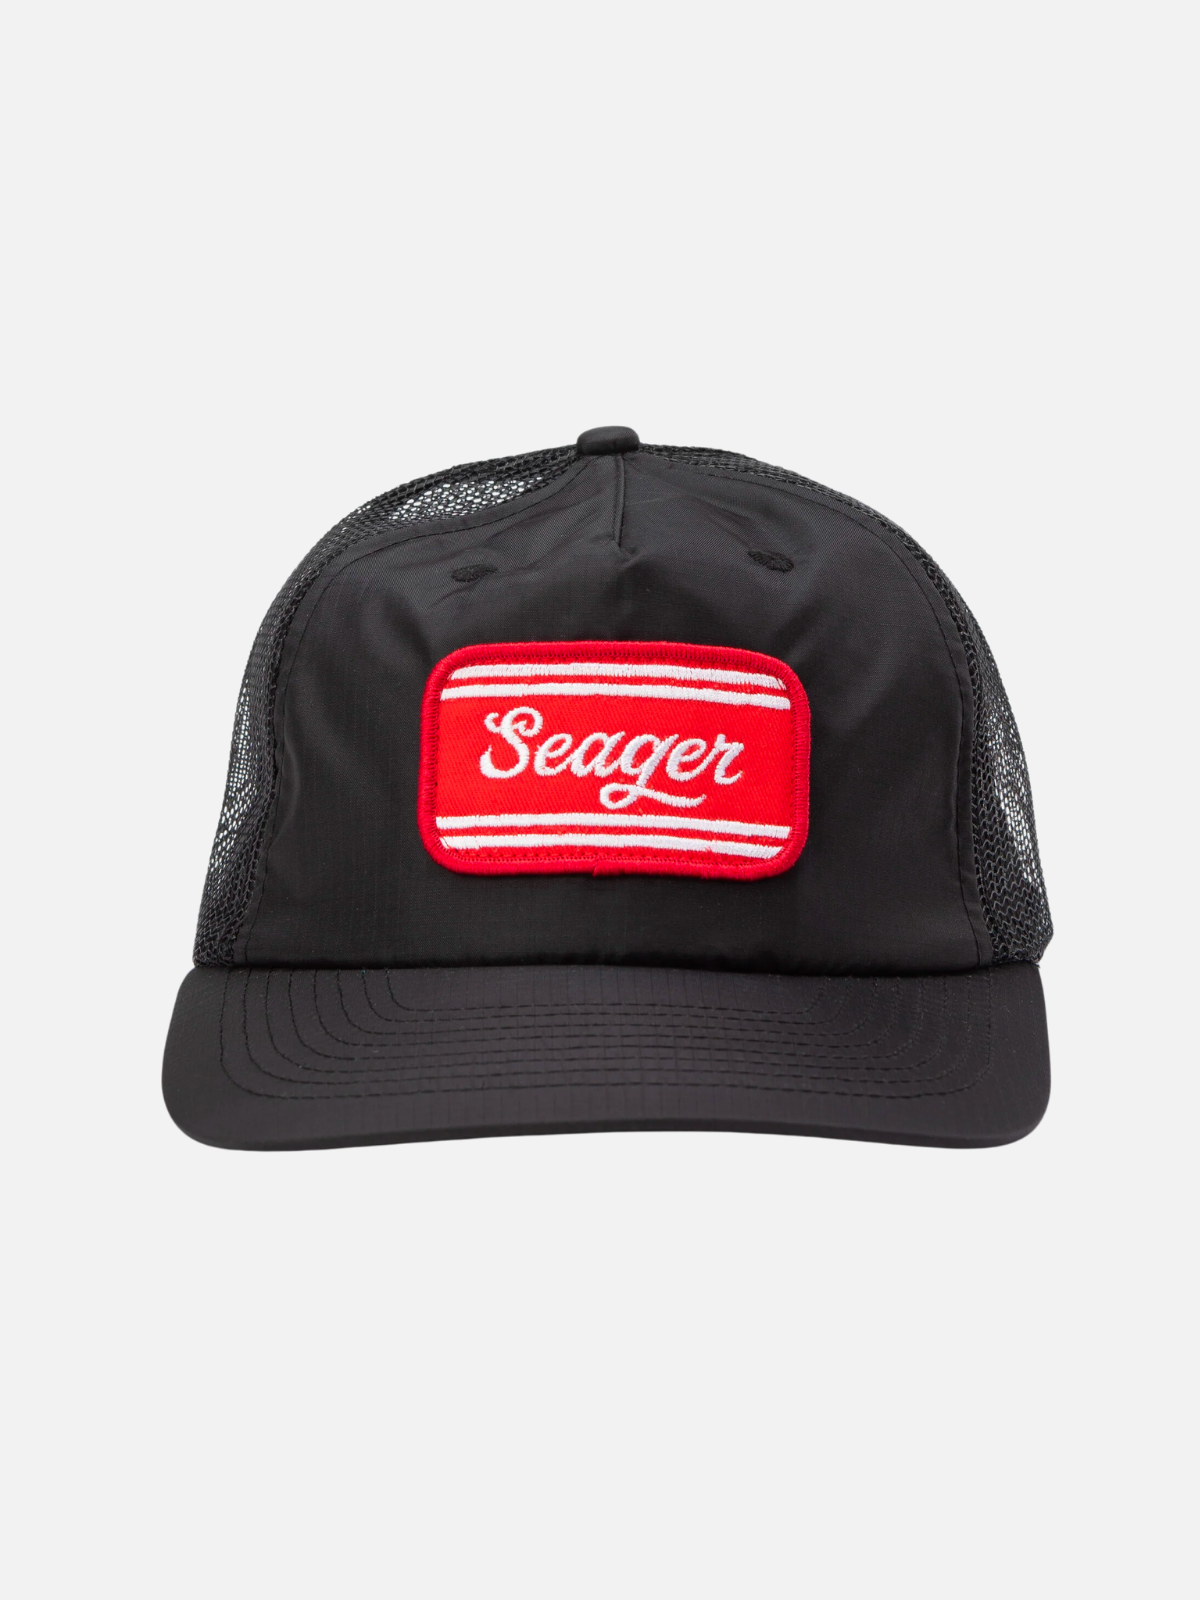 seager whitewater nylon mesh snapback trucker hat black red embroidered patch kempt athens ga georgia men's clothing store